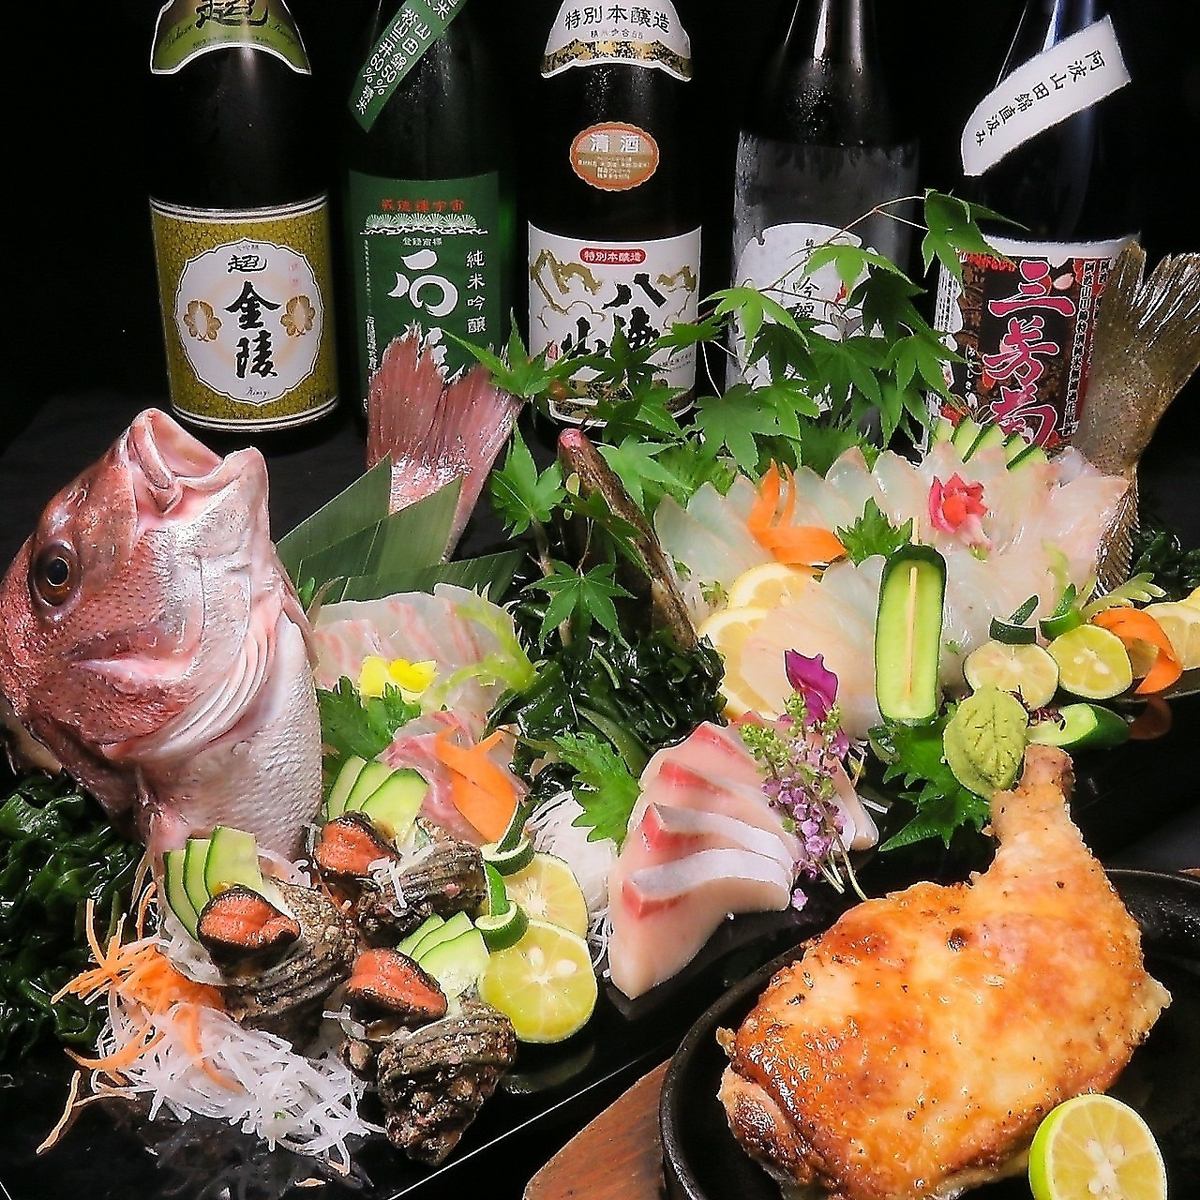 At the main store, we also recommend the fish dishes that use fresh fish purchased on the day.